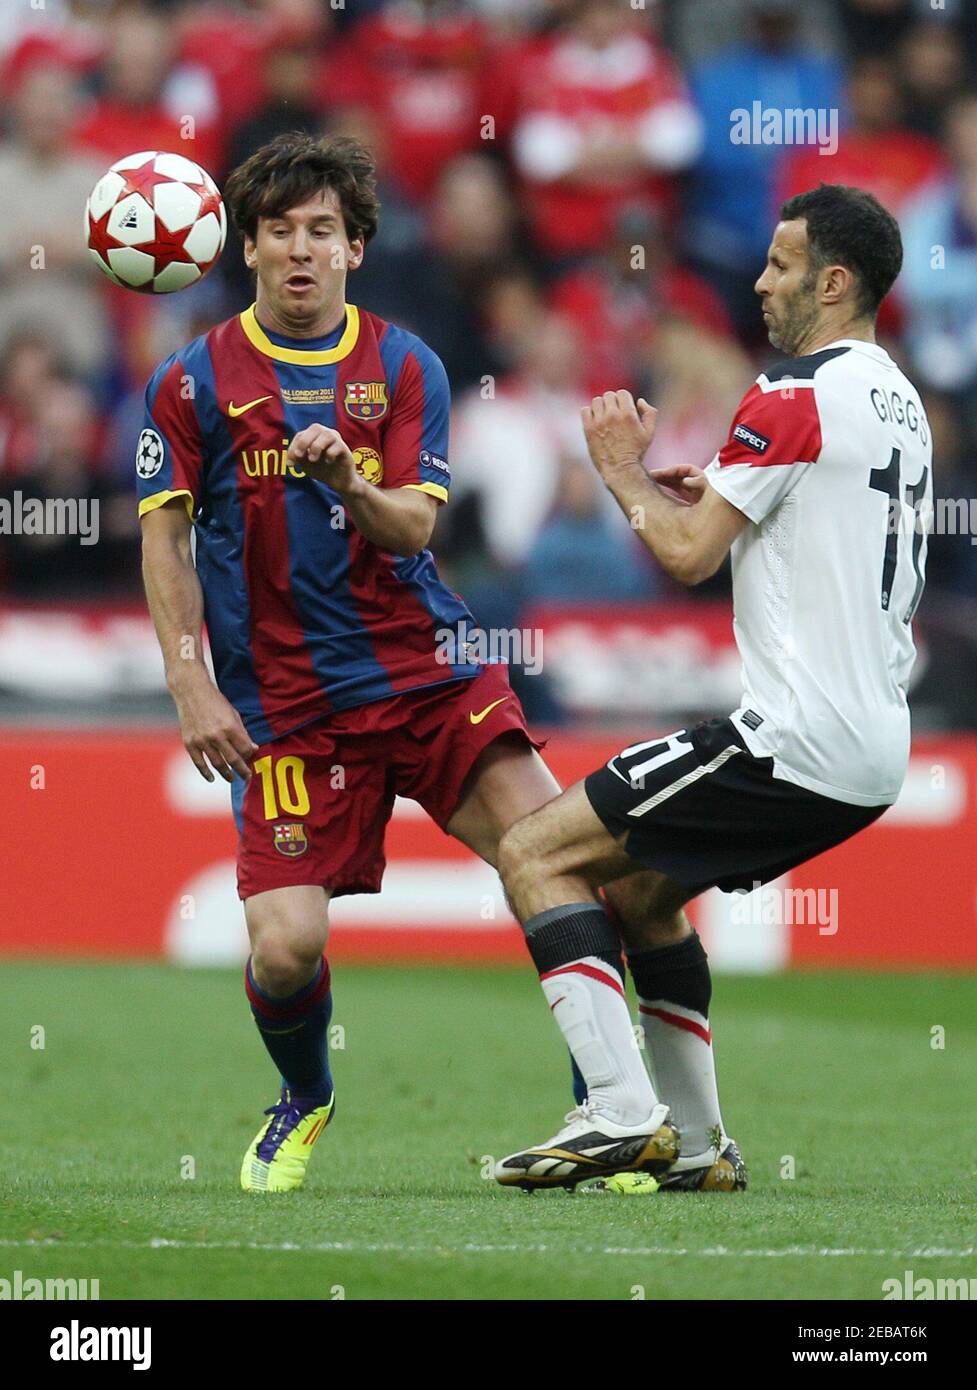 Football - Manchester United v FC Barcelona 2011 UEFA Champions League Final  - Wembley Stadium, London, England - 10/11 - 28/5/11 Barcelona's Lionel  Messi (L) and Manchester United's Ryan Giggs in action